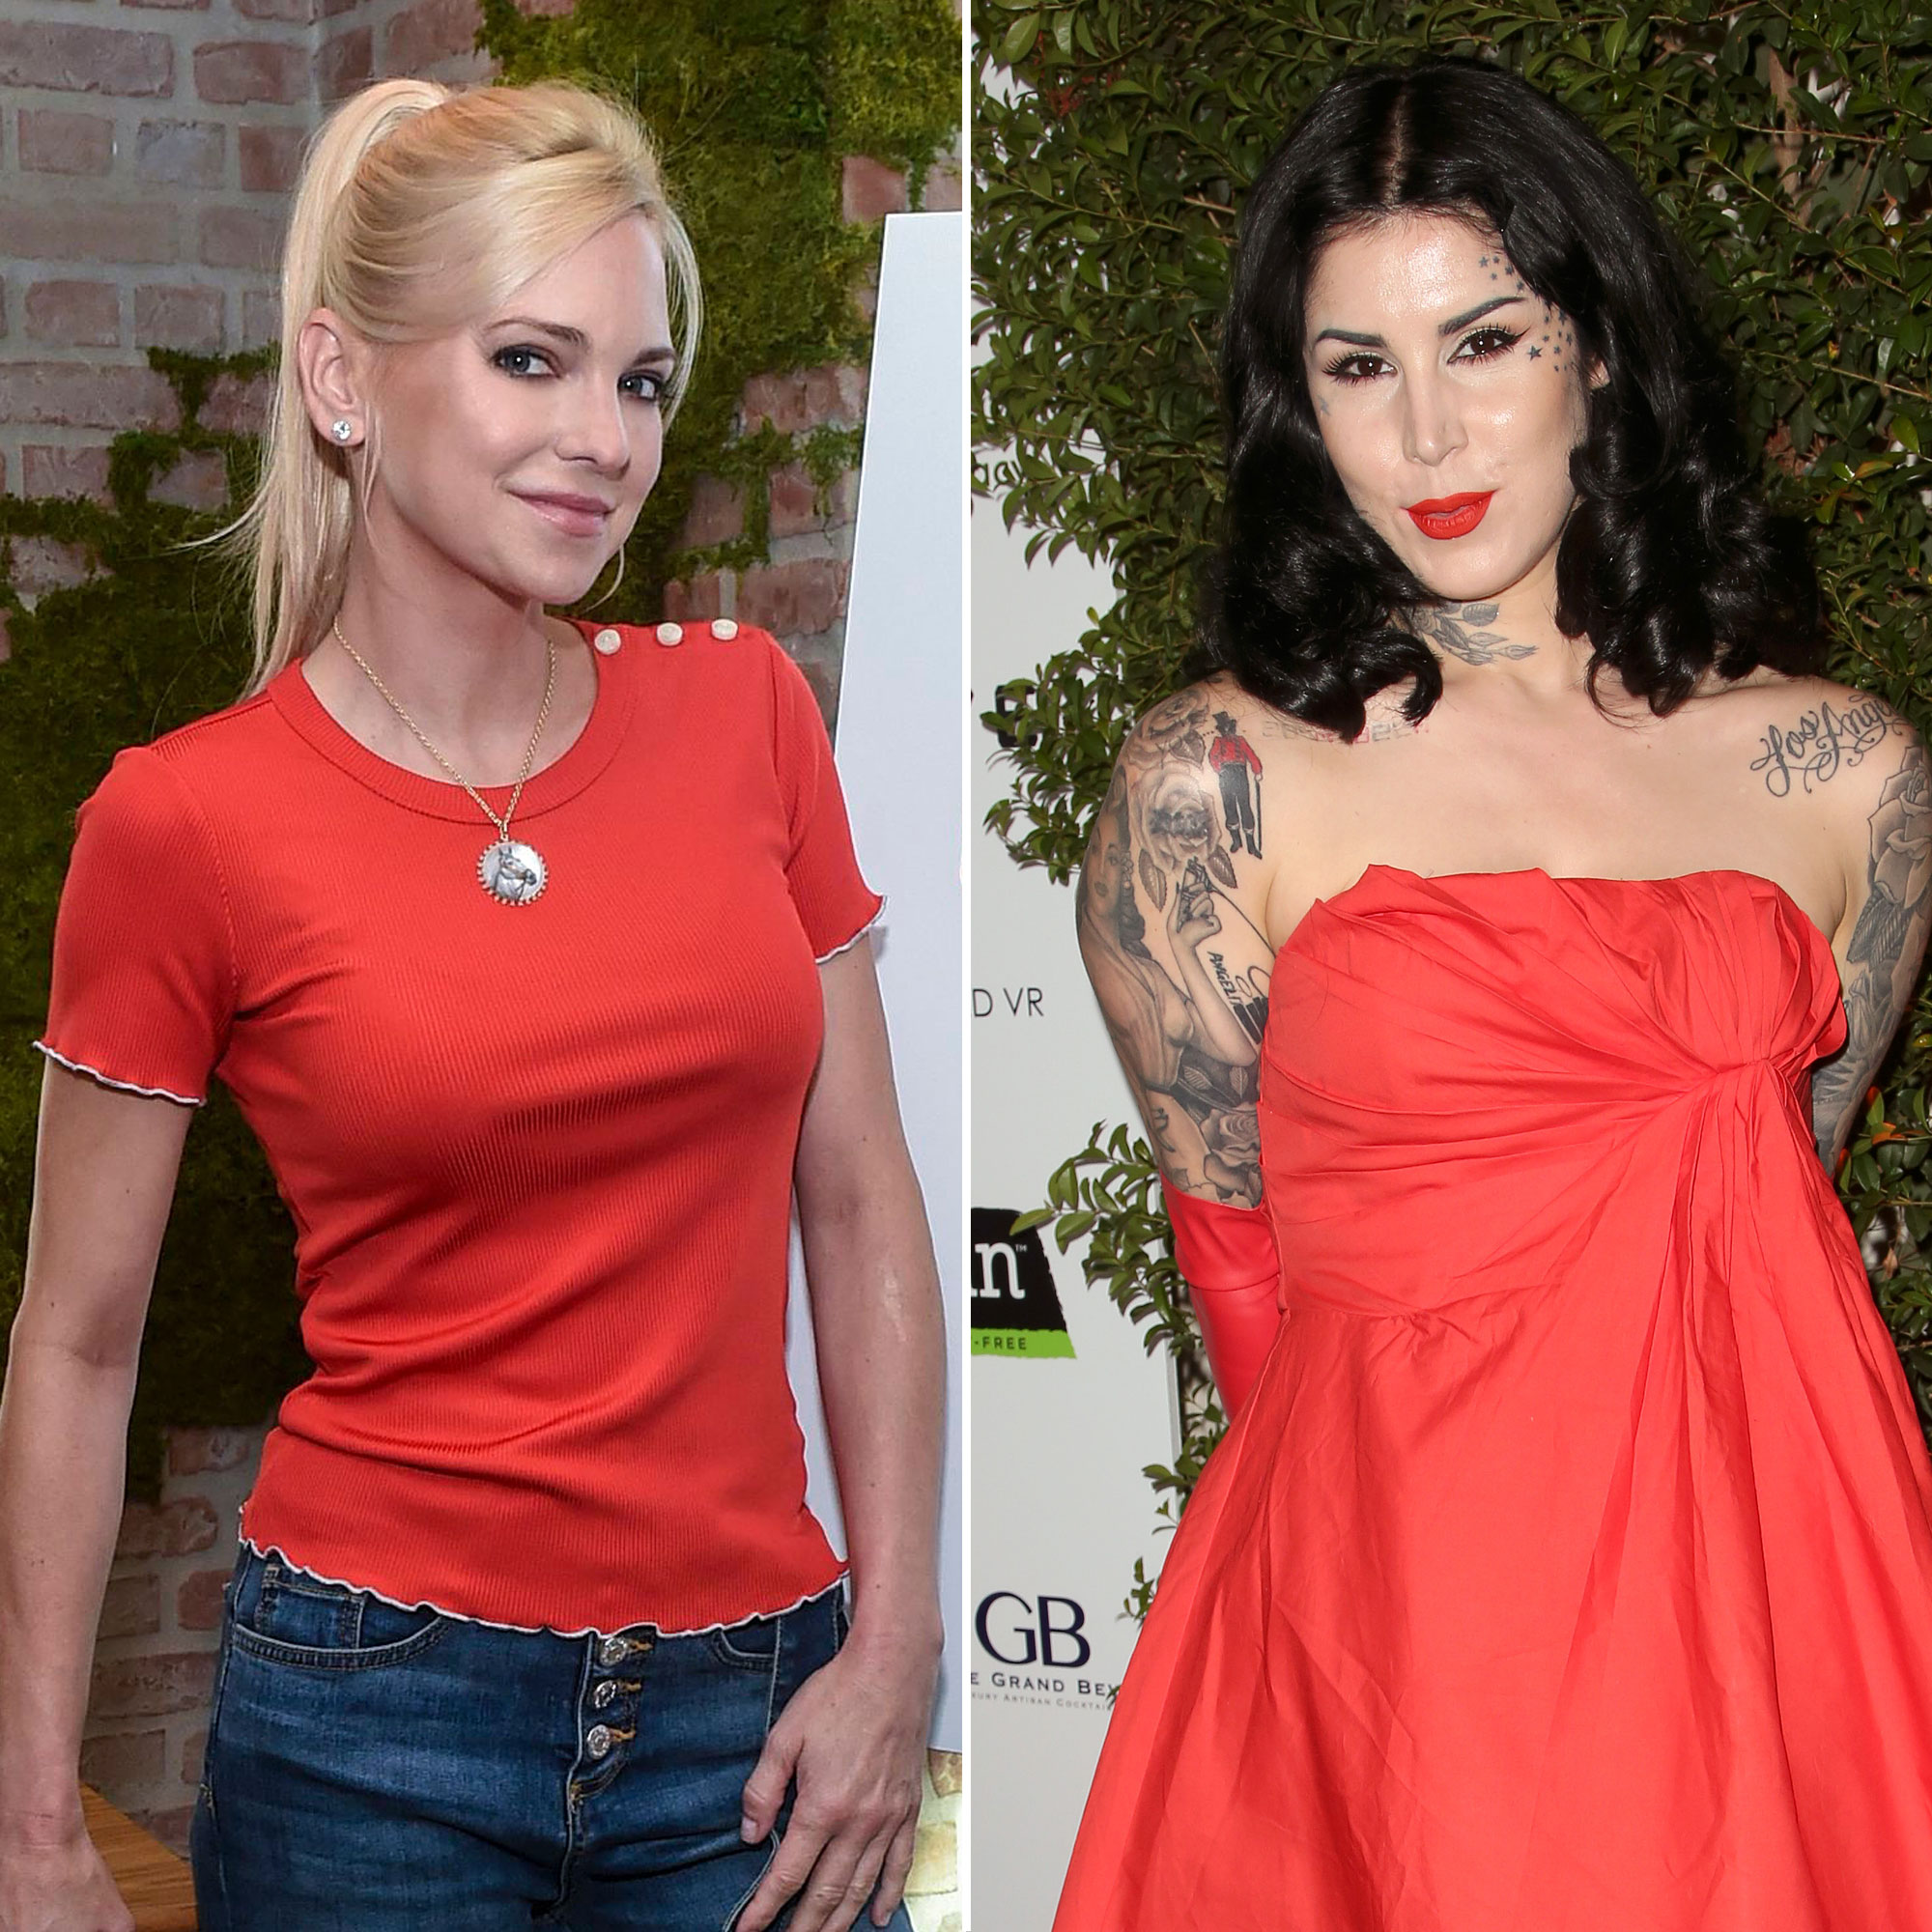 Anna Faris and Kat Von D Bond Over Cheating Exes